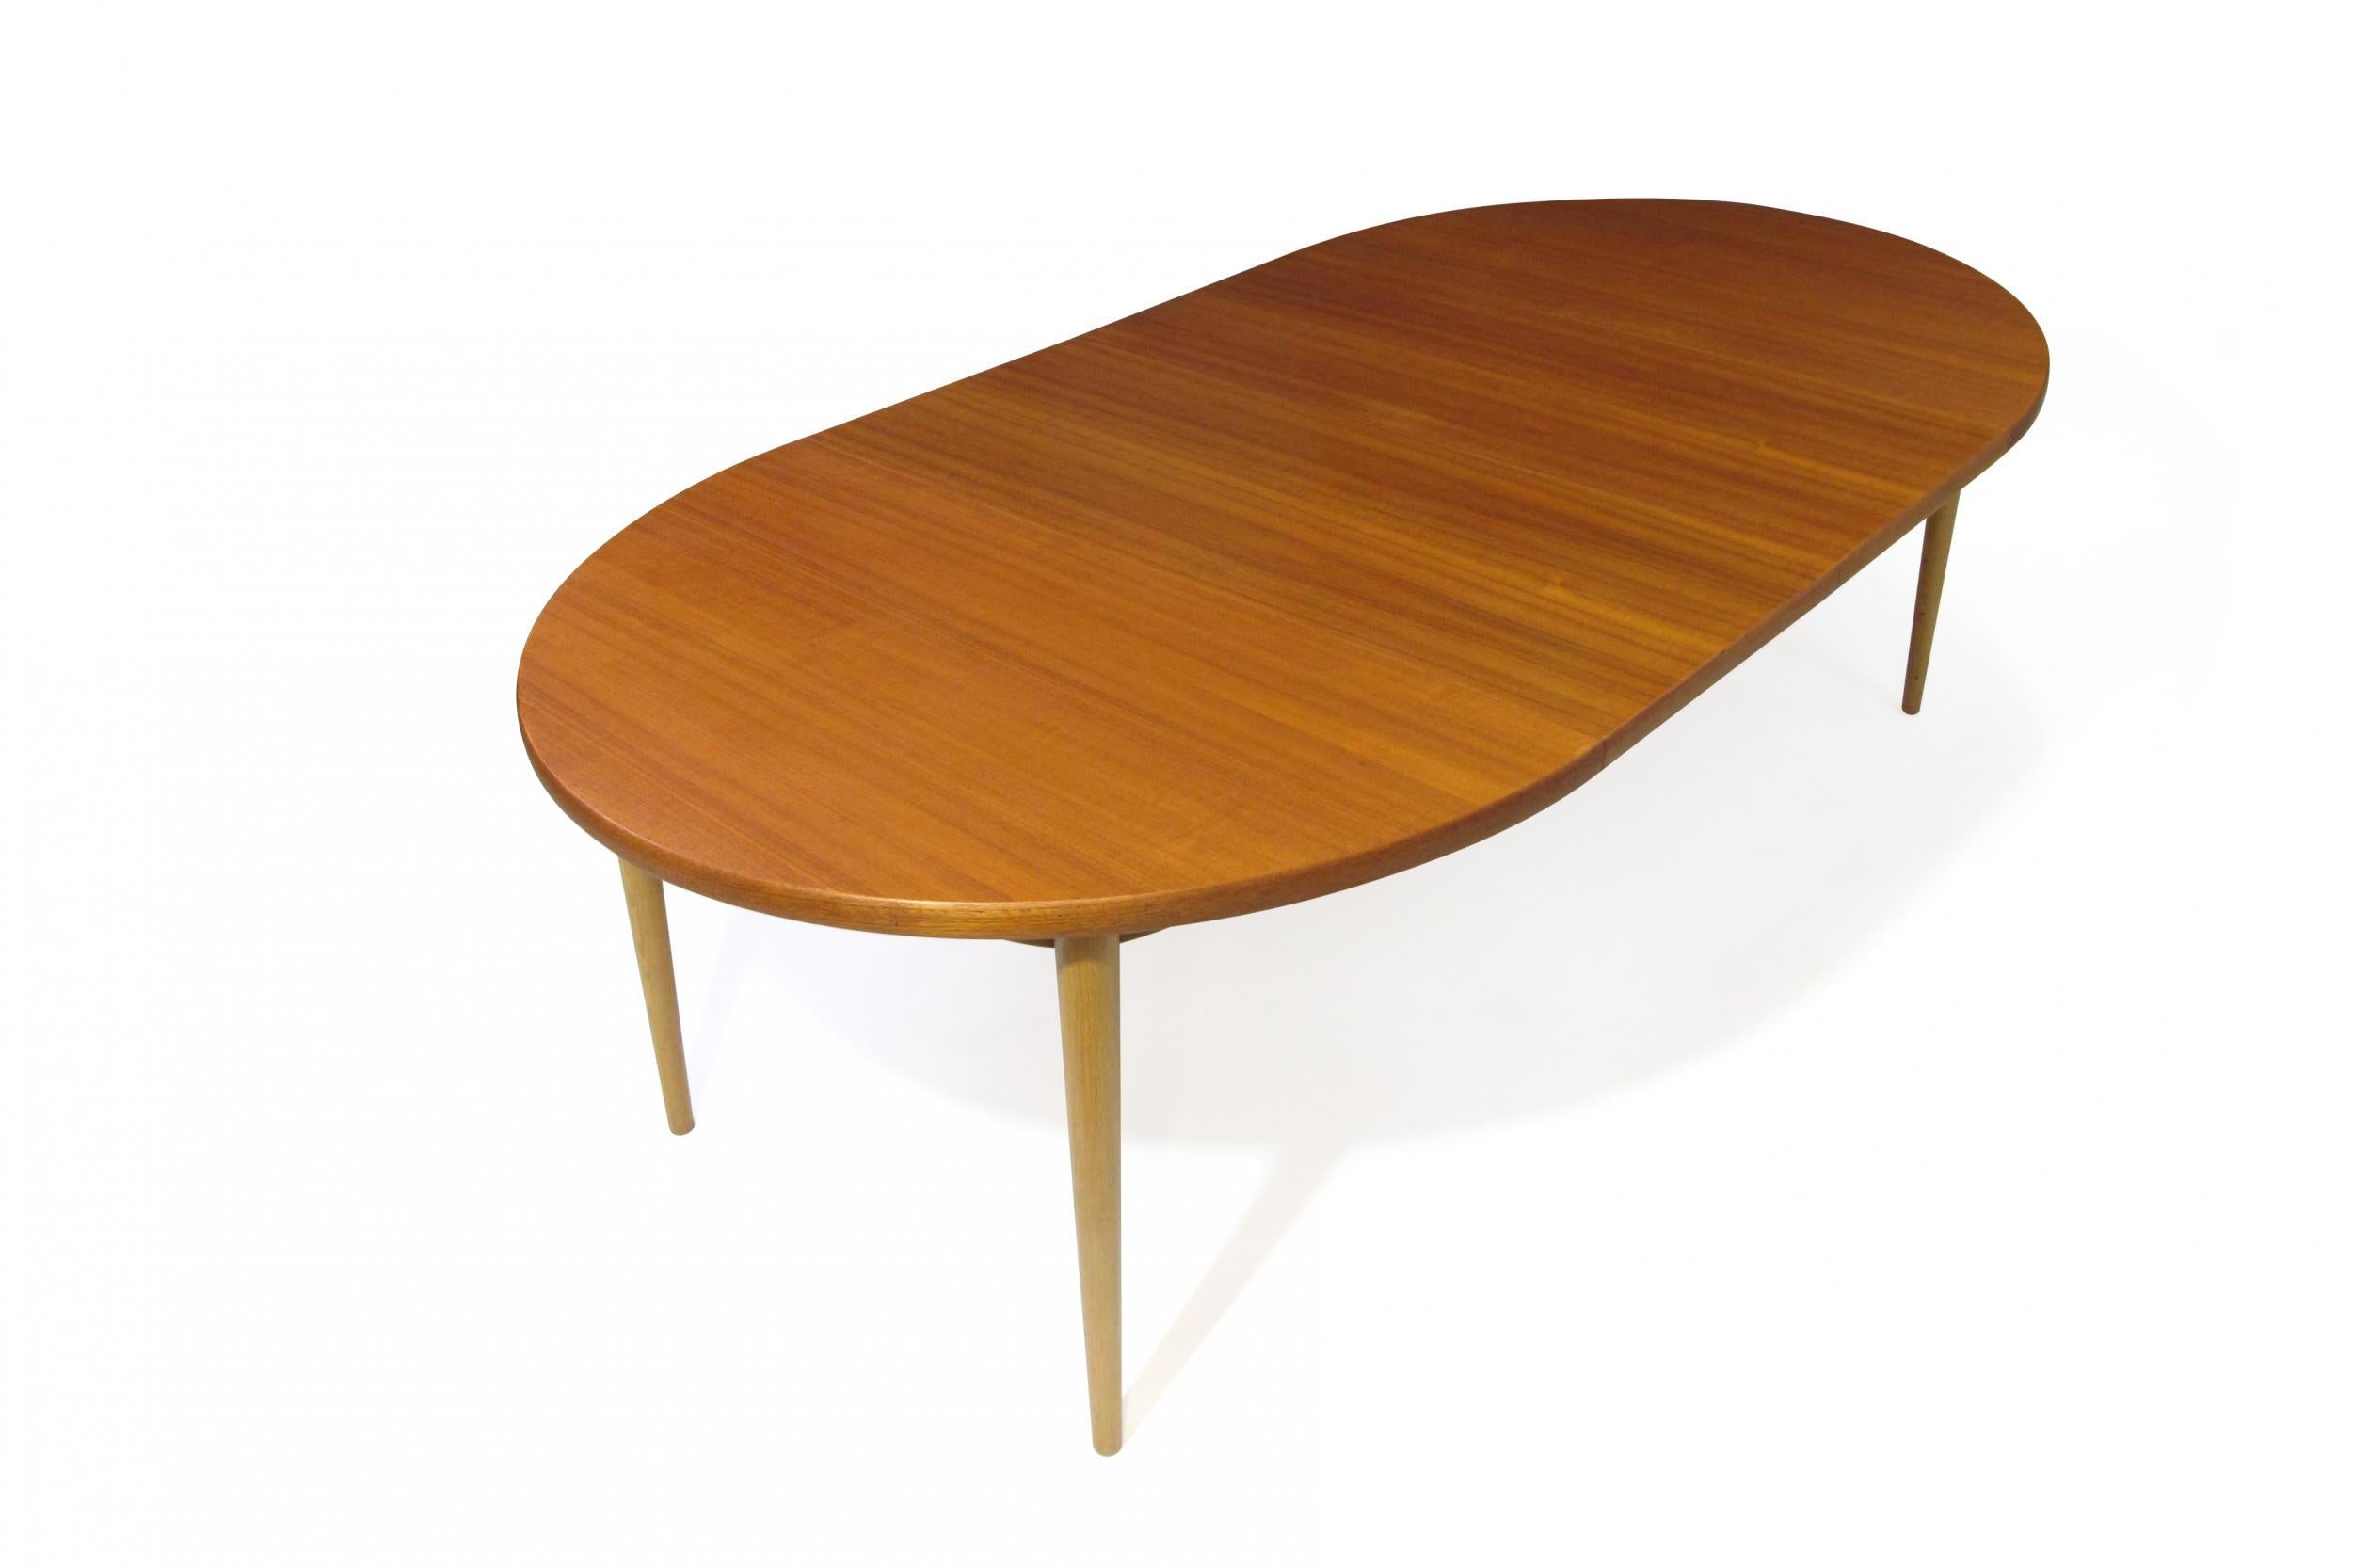 MM Moreddi oval teak dining table with two insert leaves raised on solid oak tapered legs. Table for 6, 8, or 10 guests. The table has an MM Moreddi stamp under the table. Measures: 55